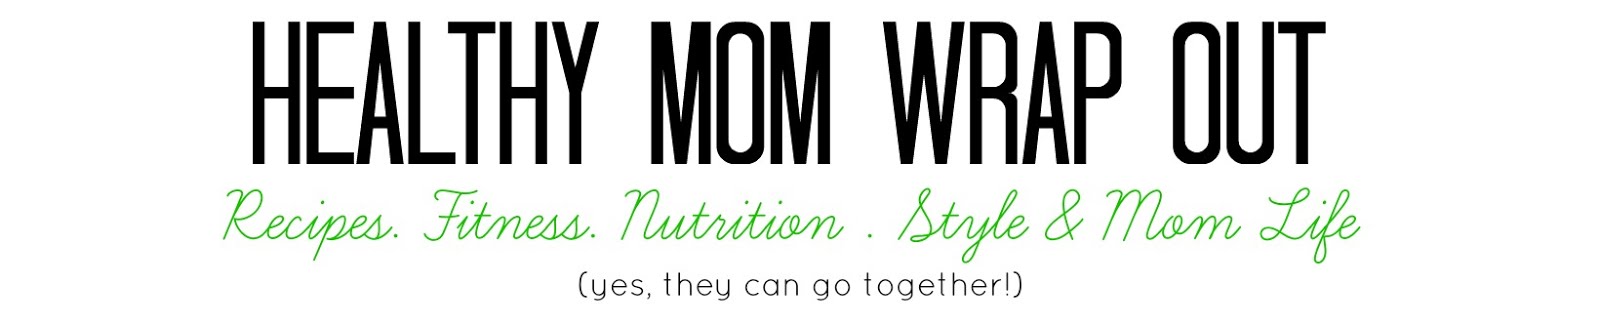 healthymomwrapout